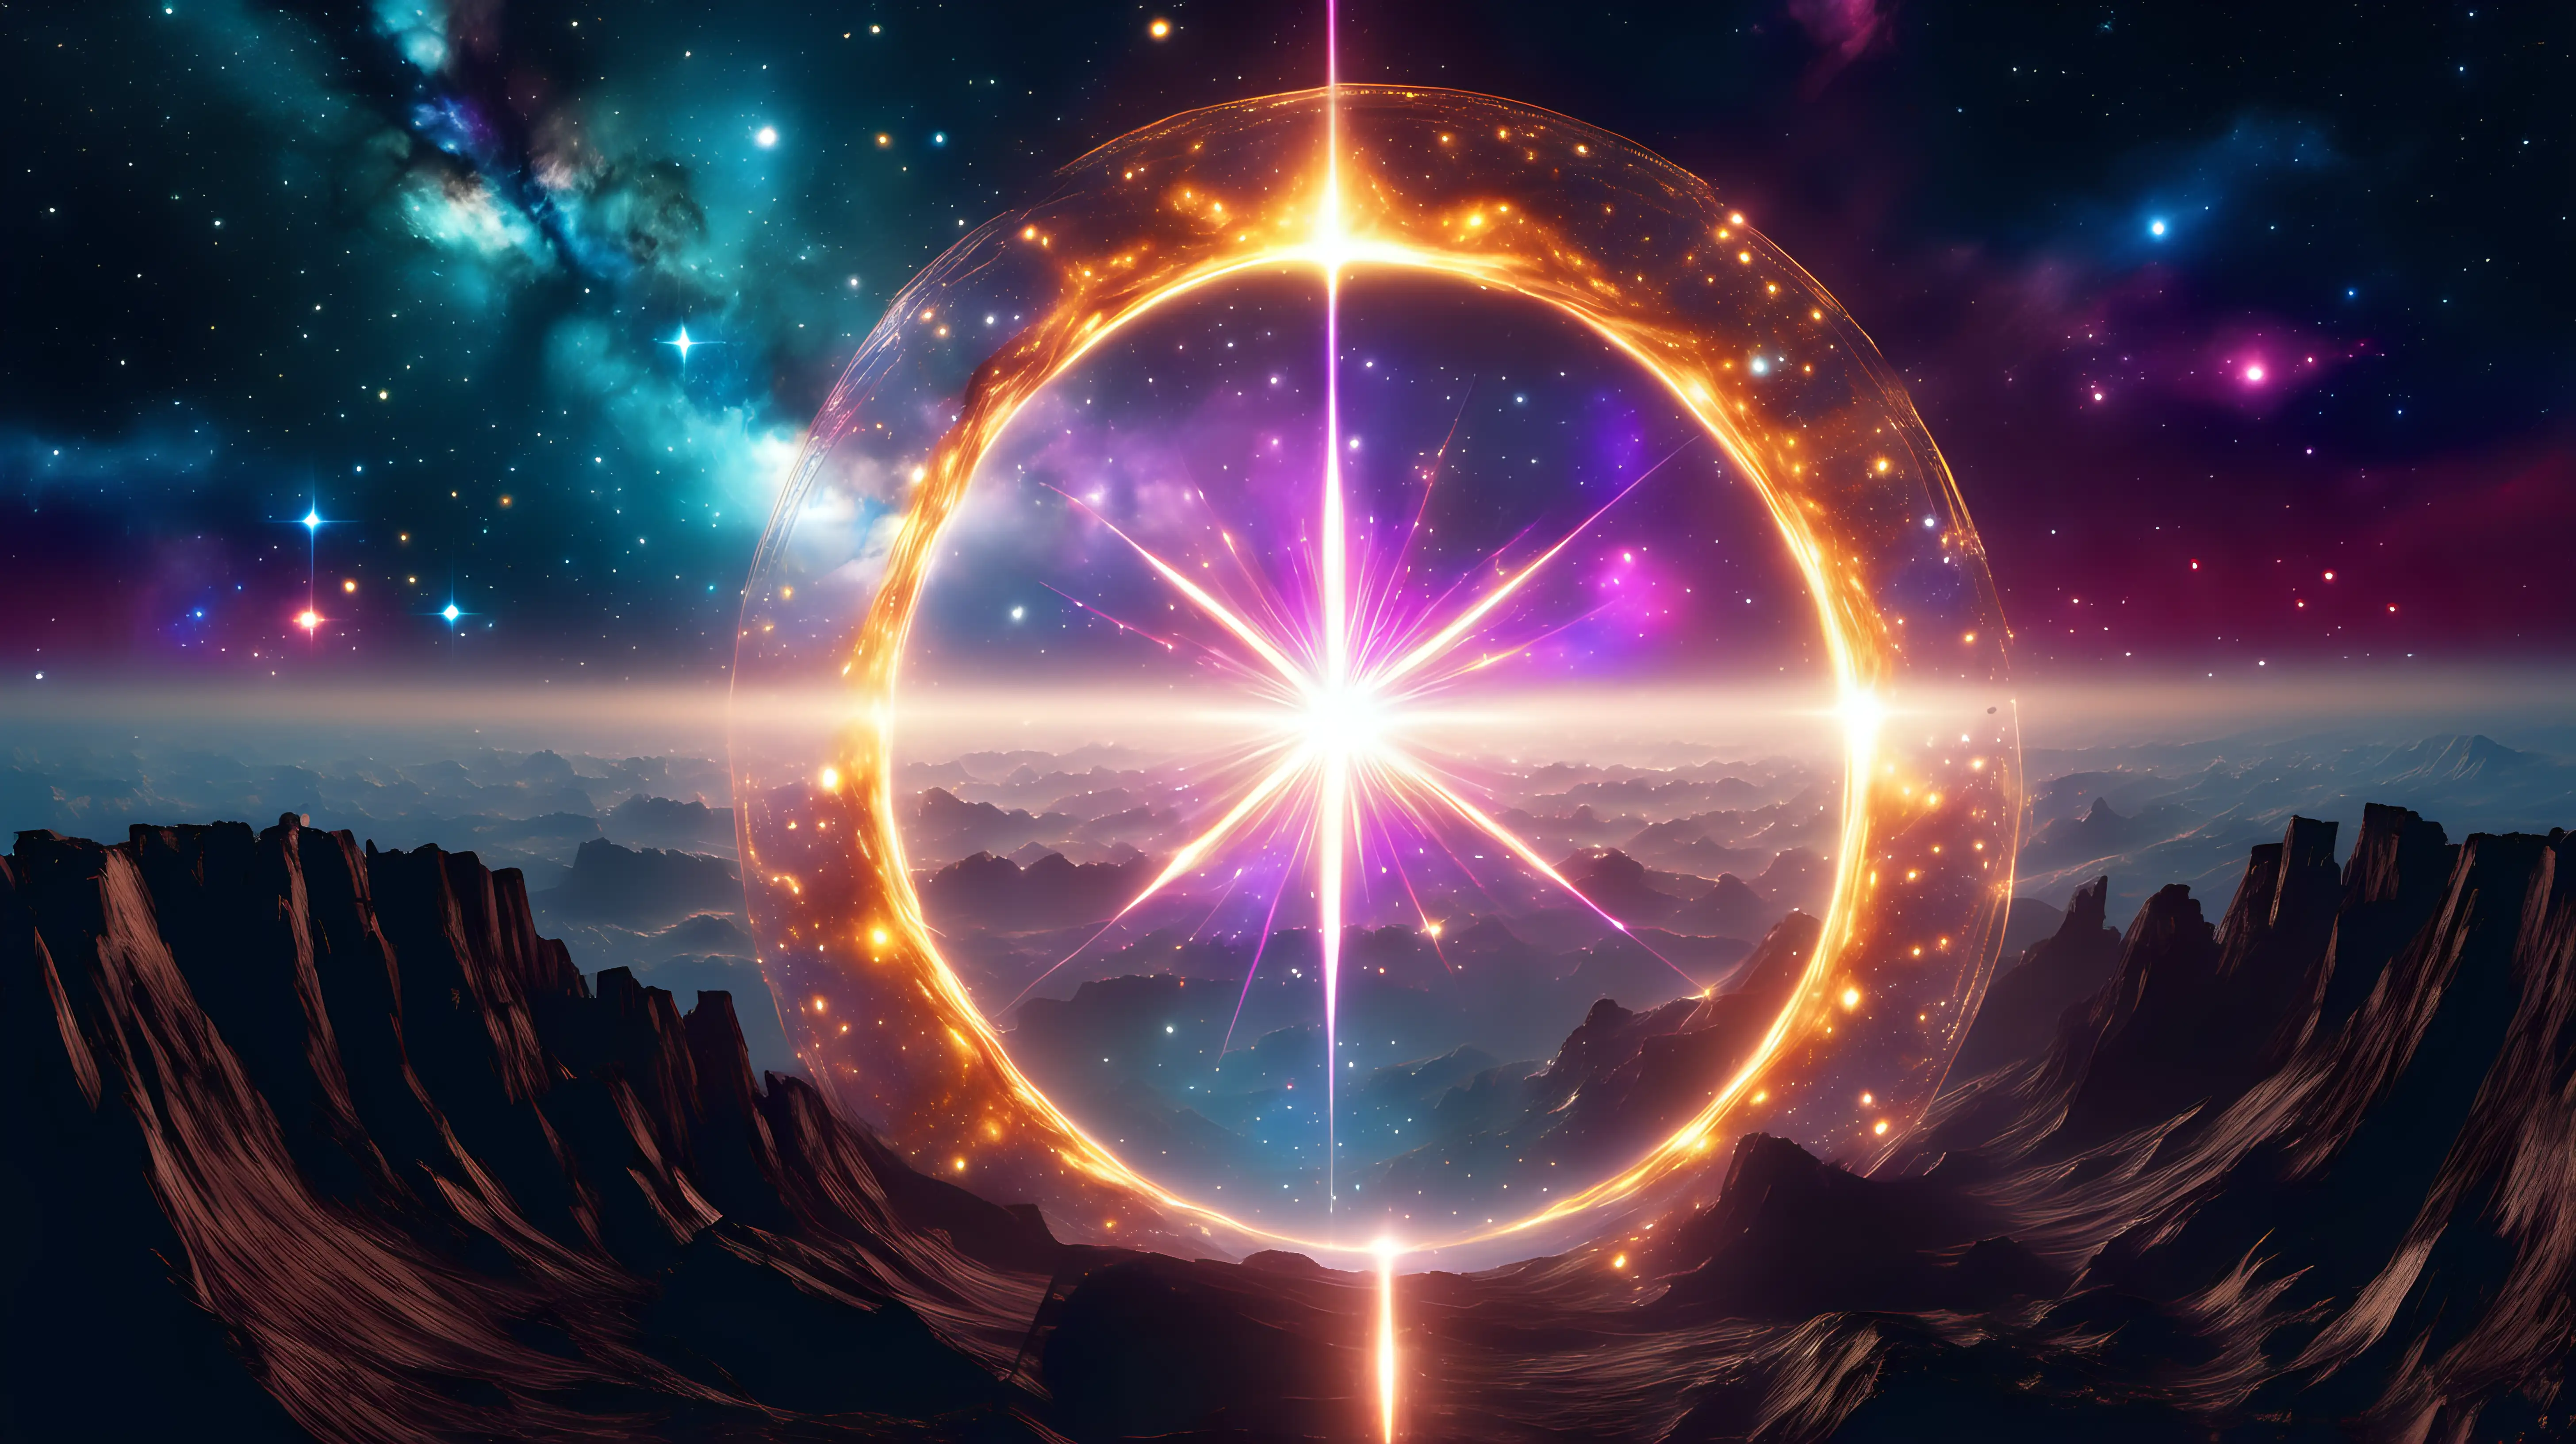 Generate a mesmerizing AI image of a cosmic portal opening in a star-filled sky, setting the stage for an epic and otherworldly streaming experience